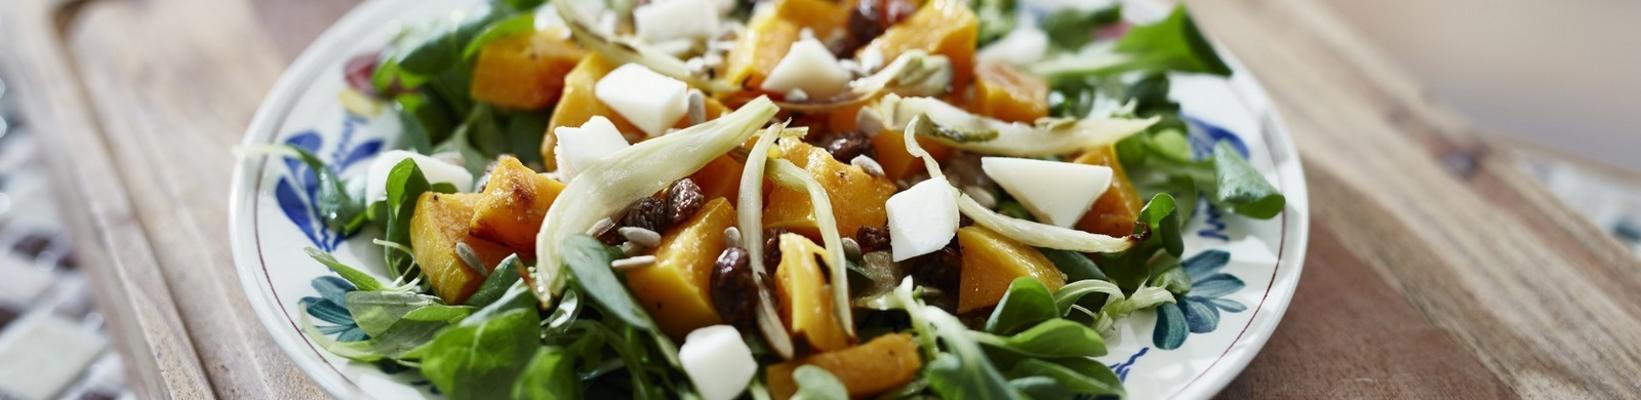 the pumpkin salad with goat cheese from marieke paalmans